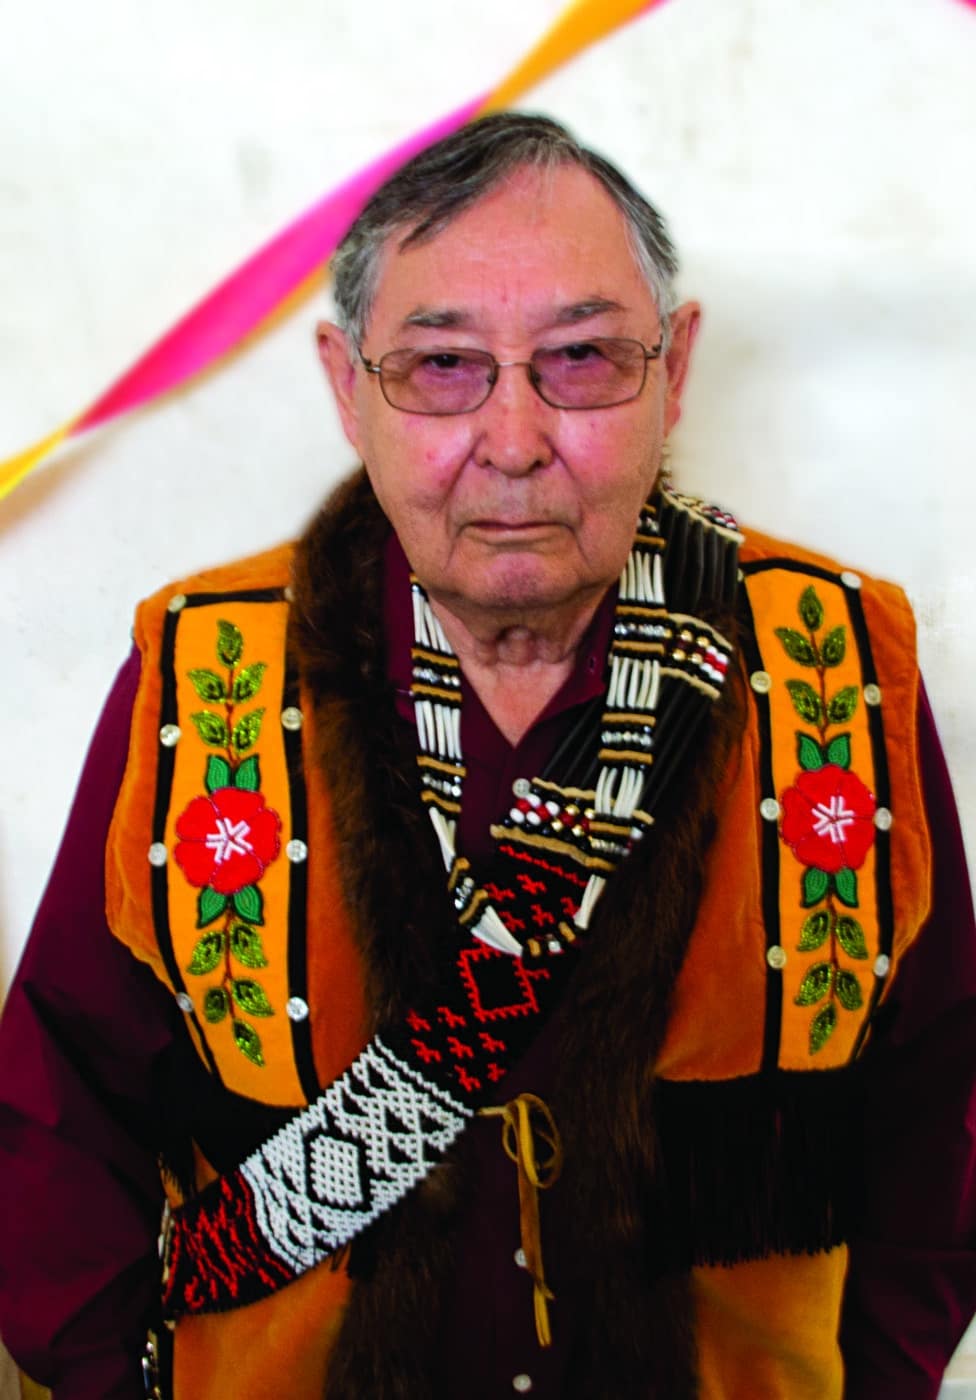 Robert Marshall serves as Ahtna, Inc.’s first President from 1972-1976